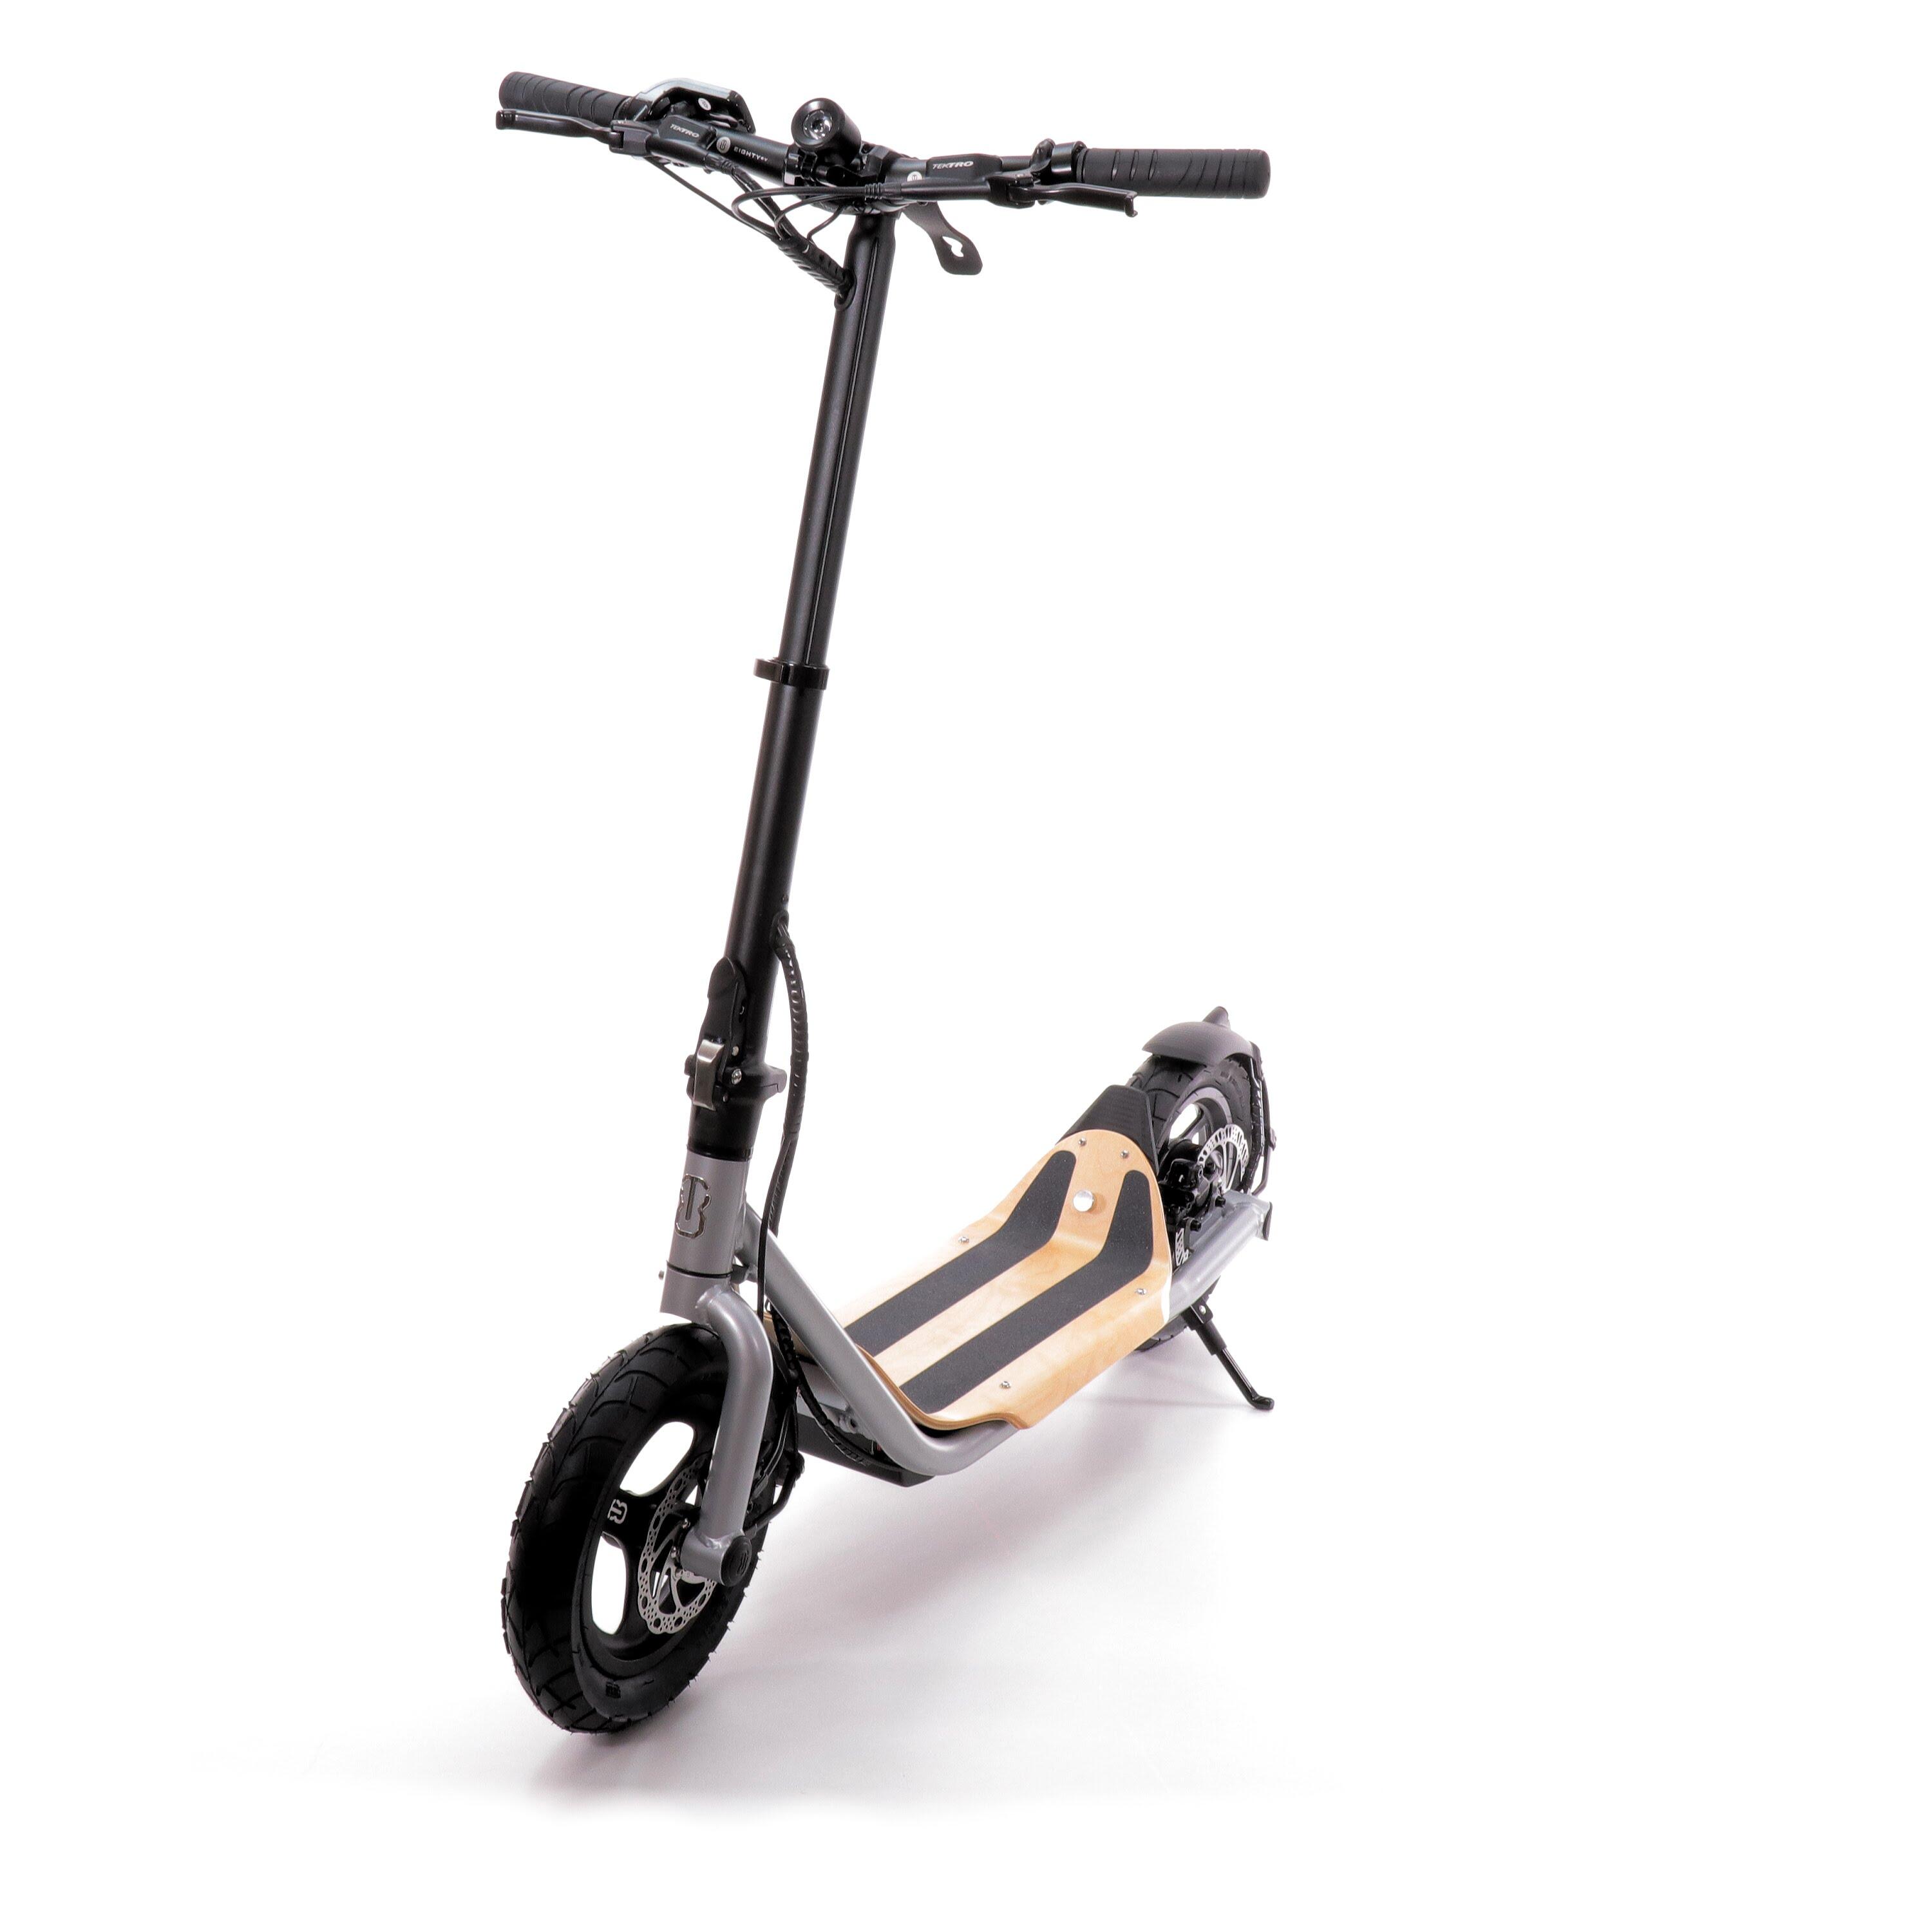 8TEV 8Tev Adult Electric Scooter, B12 Classic, Silver